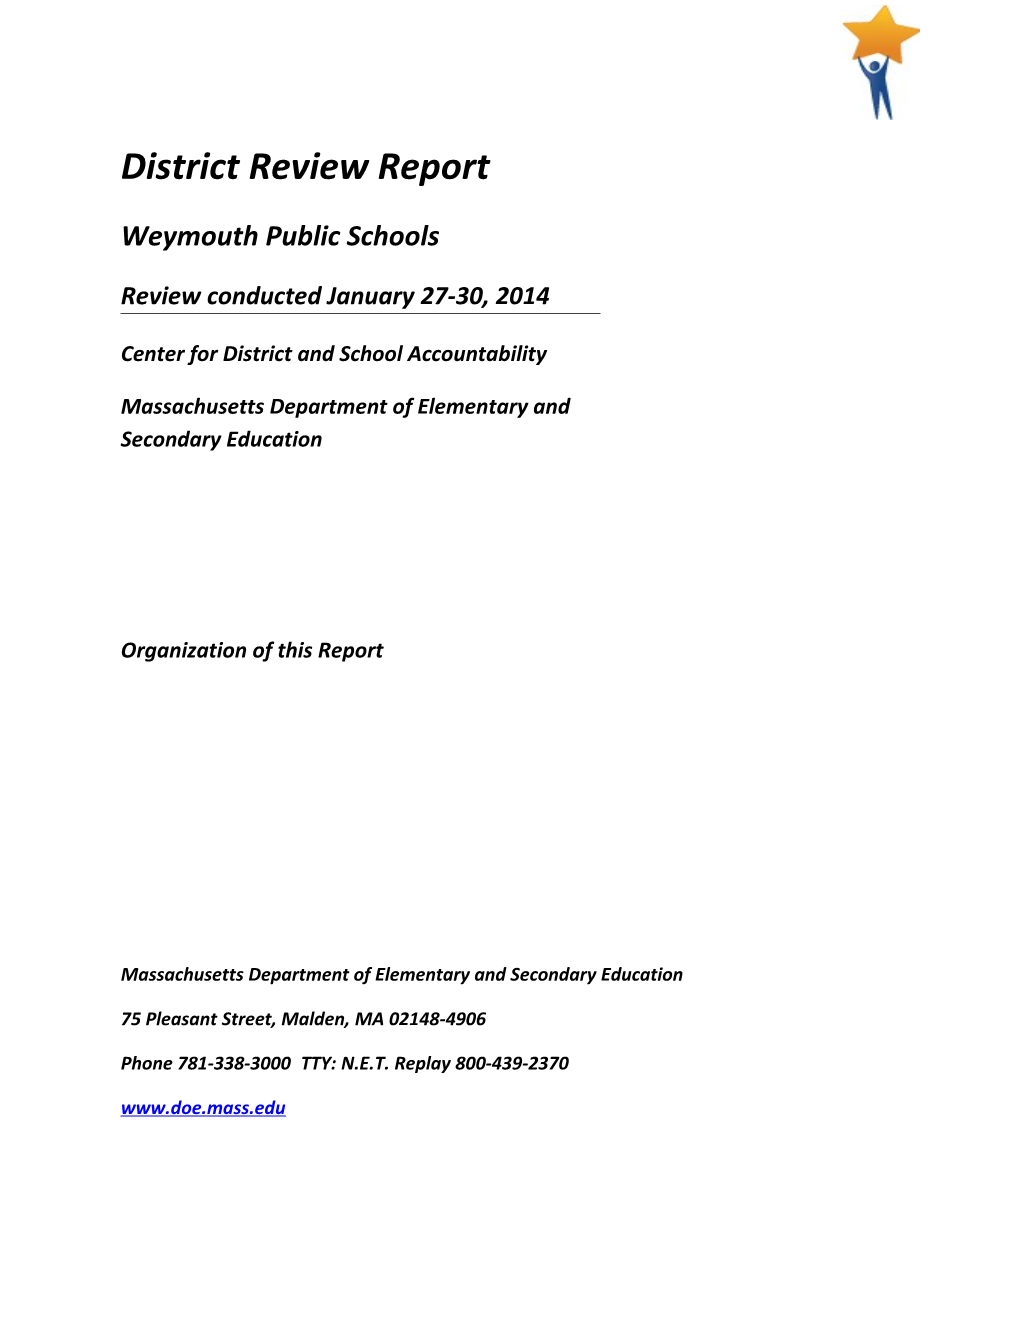 Weymouth Public Schools 2014 District Review Report